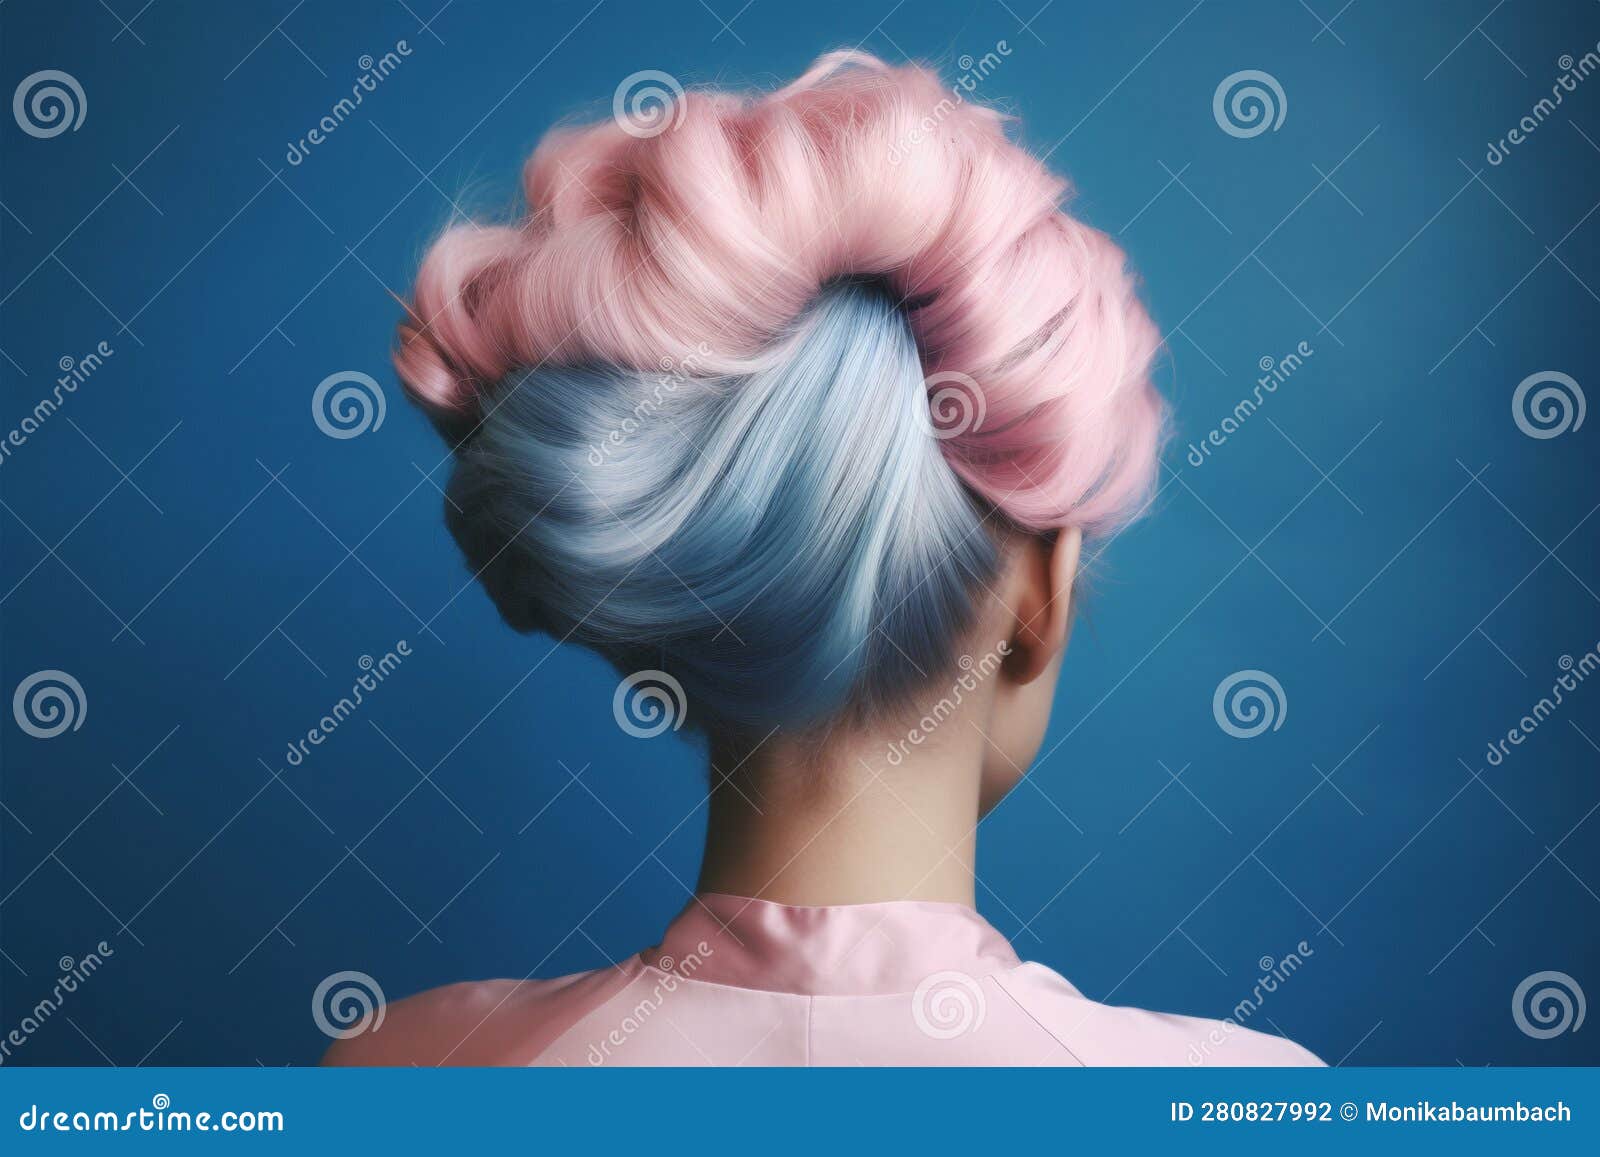 9. "Pink and Blue Hair: The Gender-Neutral Hair Trend Taking Over" by Refinery29 - wide 3